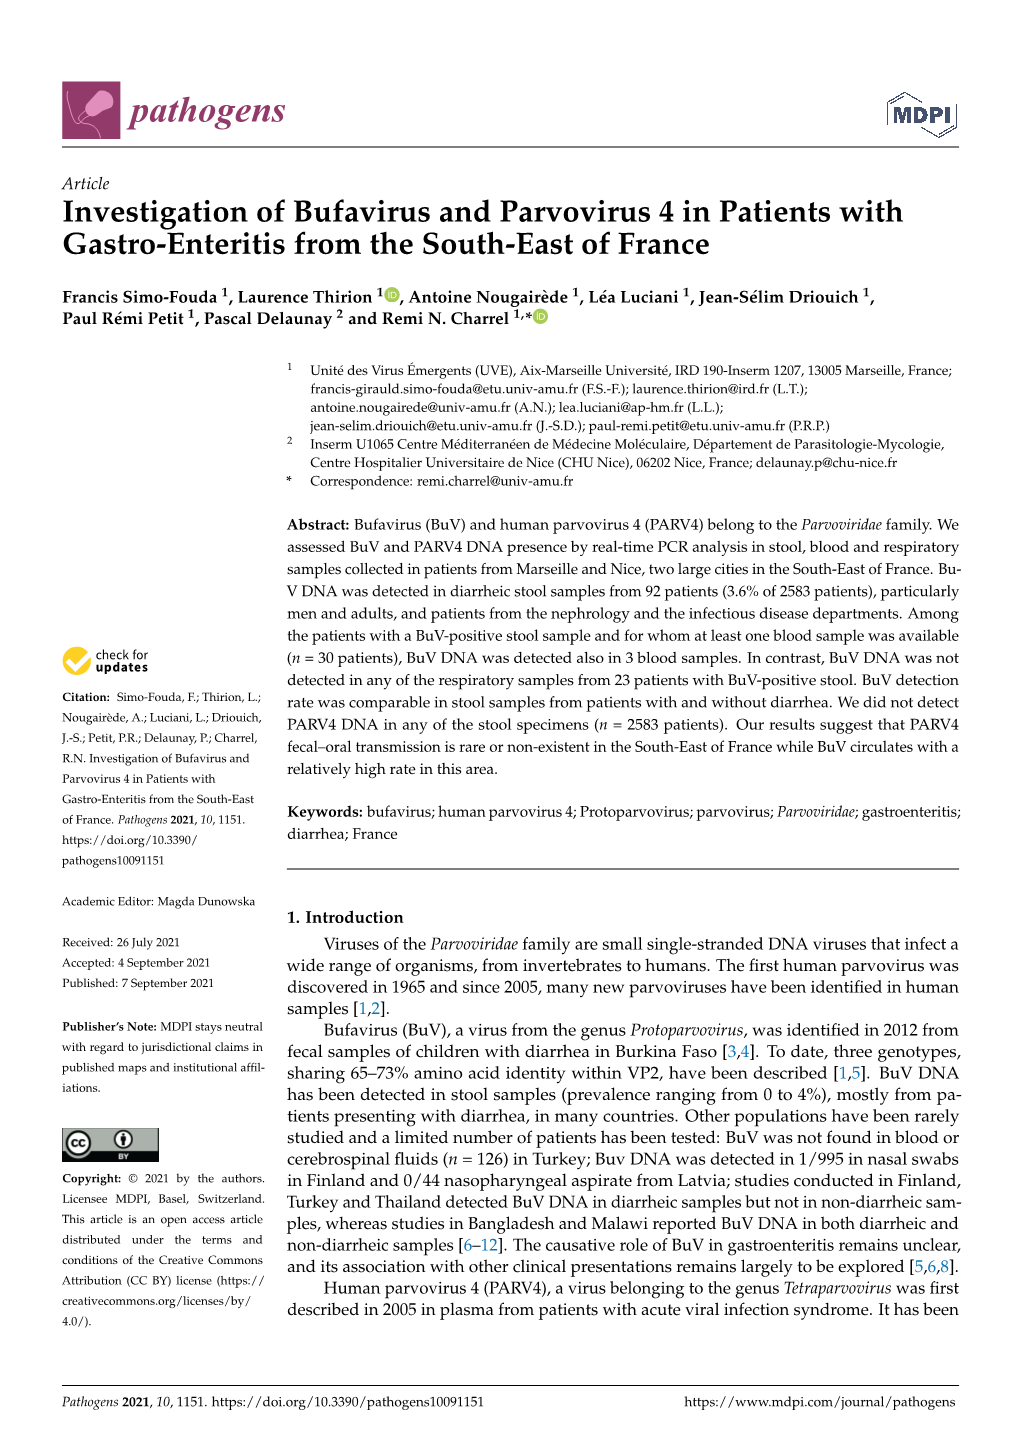 Investigation of Bufavirus and Parvovirus 4 in Patients with Gastro-Enteritis from the South-East of France